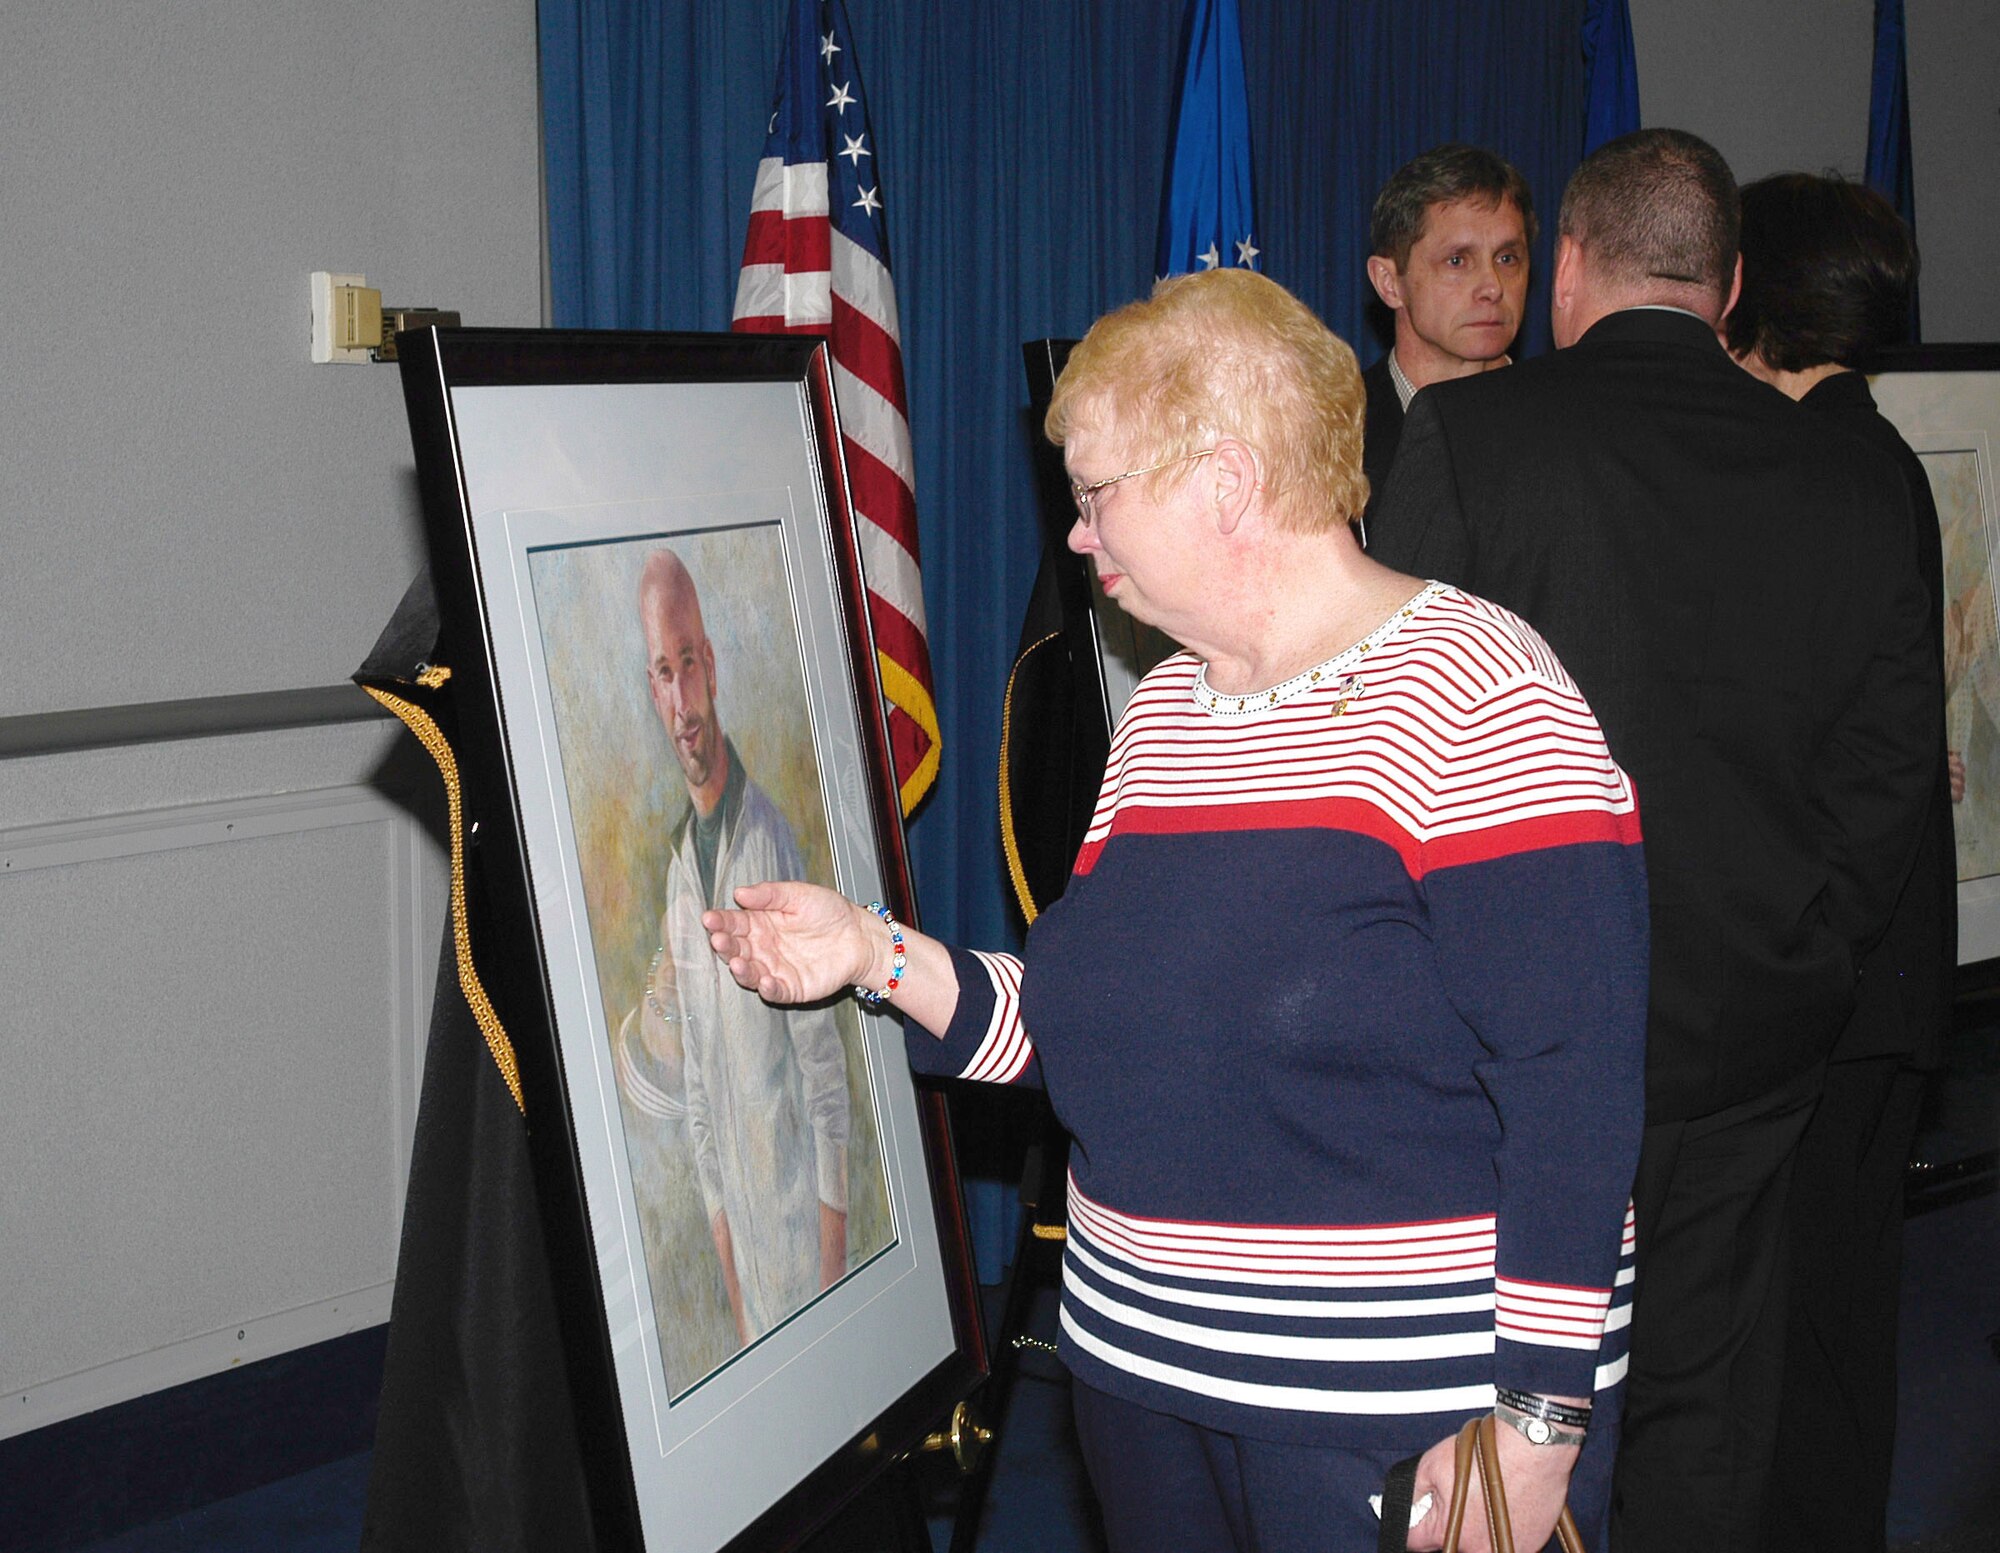 Lorraine Wieger, mother of Special Agent David Wieger, stops to touch a portrait of her son who was killed in Iraq on November 1, 2007. A portrait of SA Wieger and four other special agents were dedicated May 13 in the Headquarters Building, Air Force Office of Special Investigations Hall of Heroes. Agent Wieger was killed when his vehicle was struck by an improvised explosive device. Special Agent Wieger was posthumously awarded the Bronze Star, Purple Heart, Air Force Commendation Medal and the Air Force Combat Action Medal. (U.S. Air Force photo/Tech. Sgt. John Jung)
